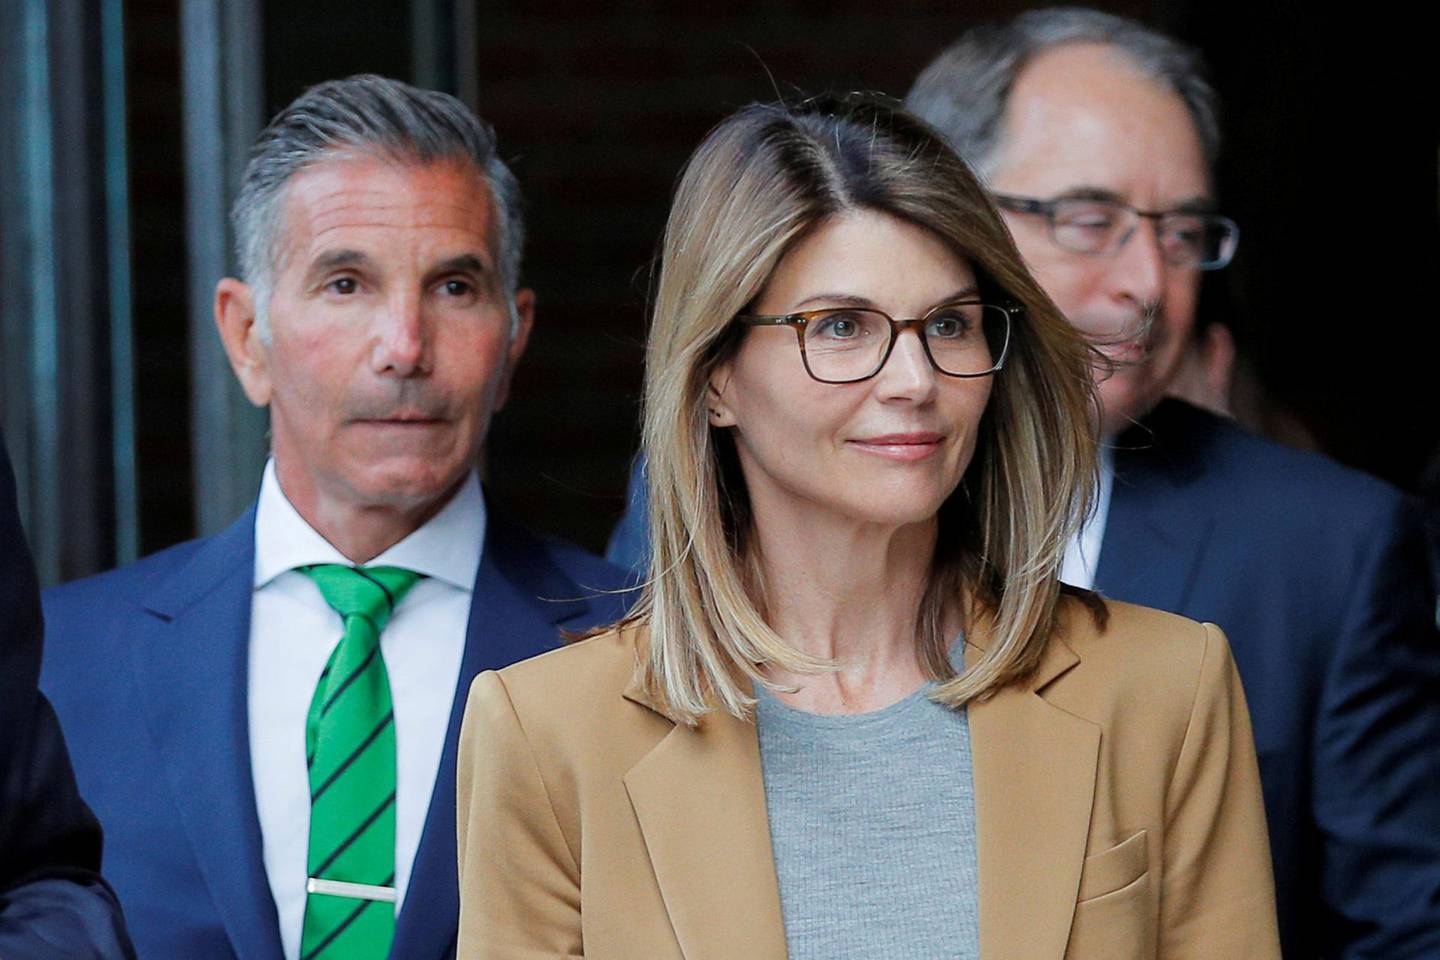 FILE PHOTO: Actor Lori Loughlin, and her husband, fashion designer Mossimo Giannulli, leave the federal courthouse after facing charges in a nationwide college admissions cheating scheme, in Boston, Massachusetts, U.S., April 3, 2019. REUTERS/Brian Snyder/File Photo